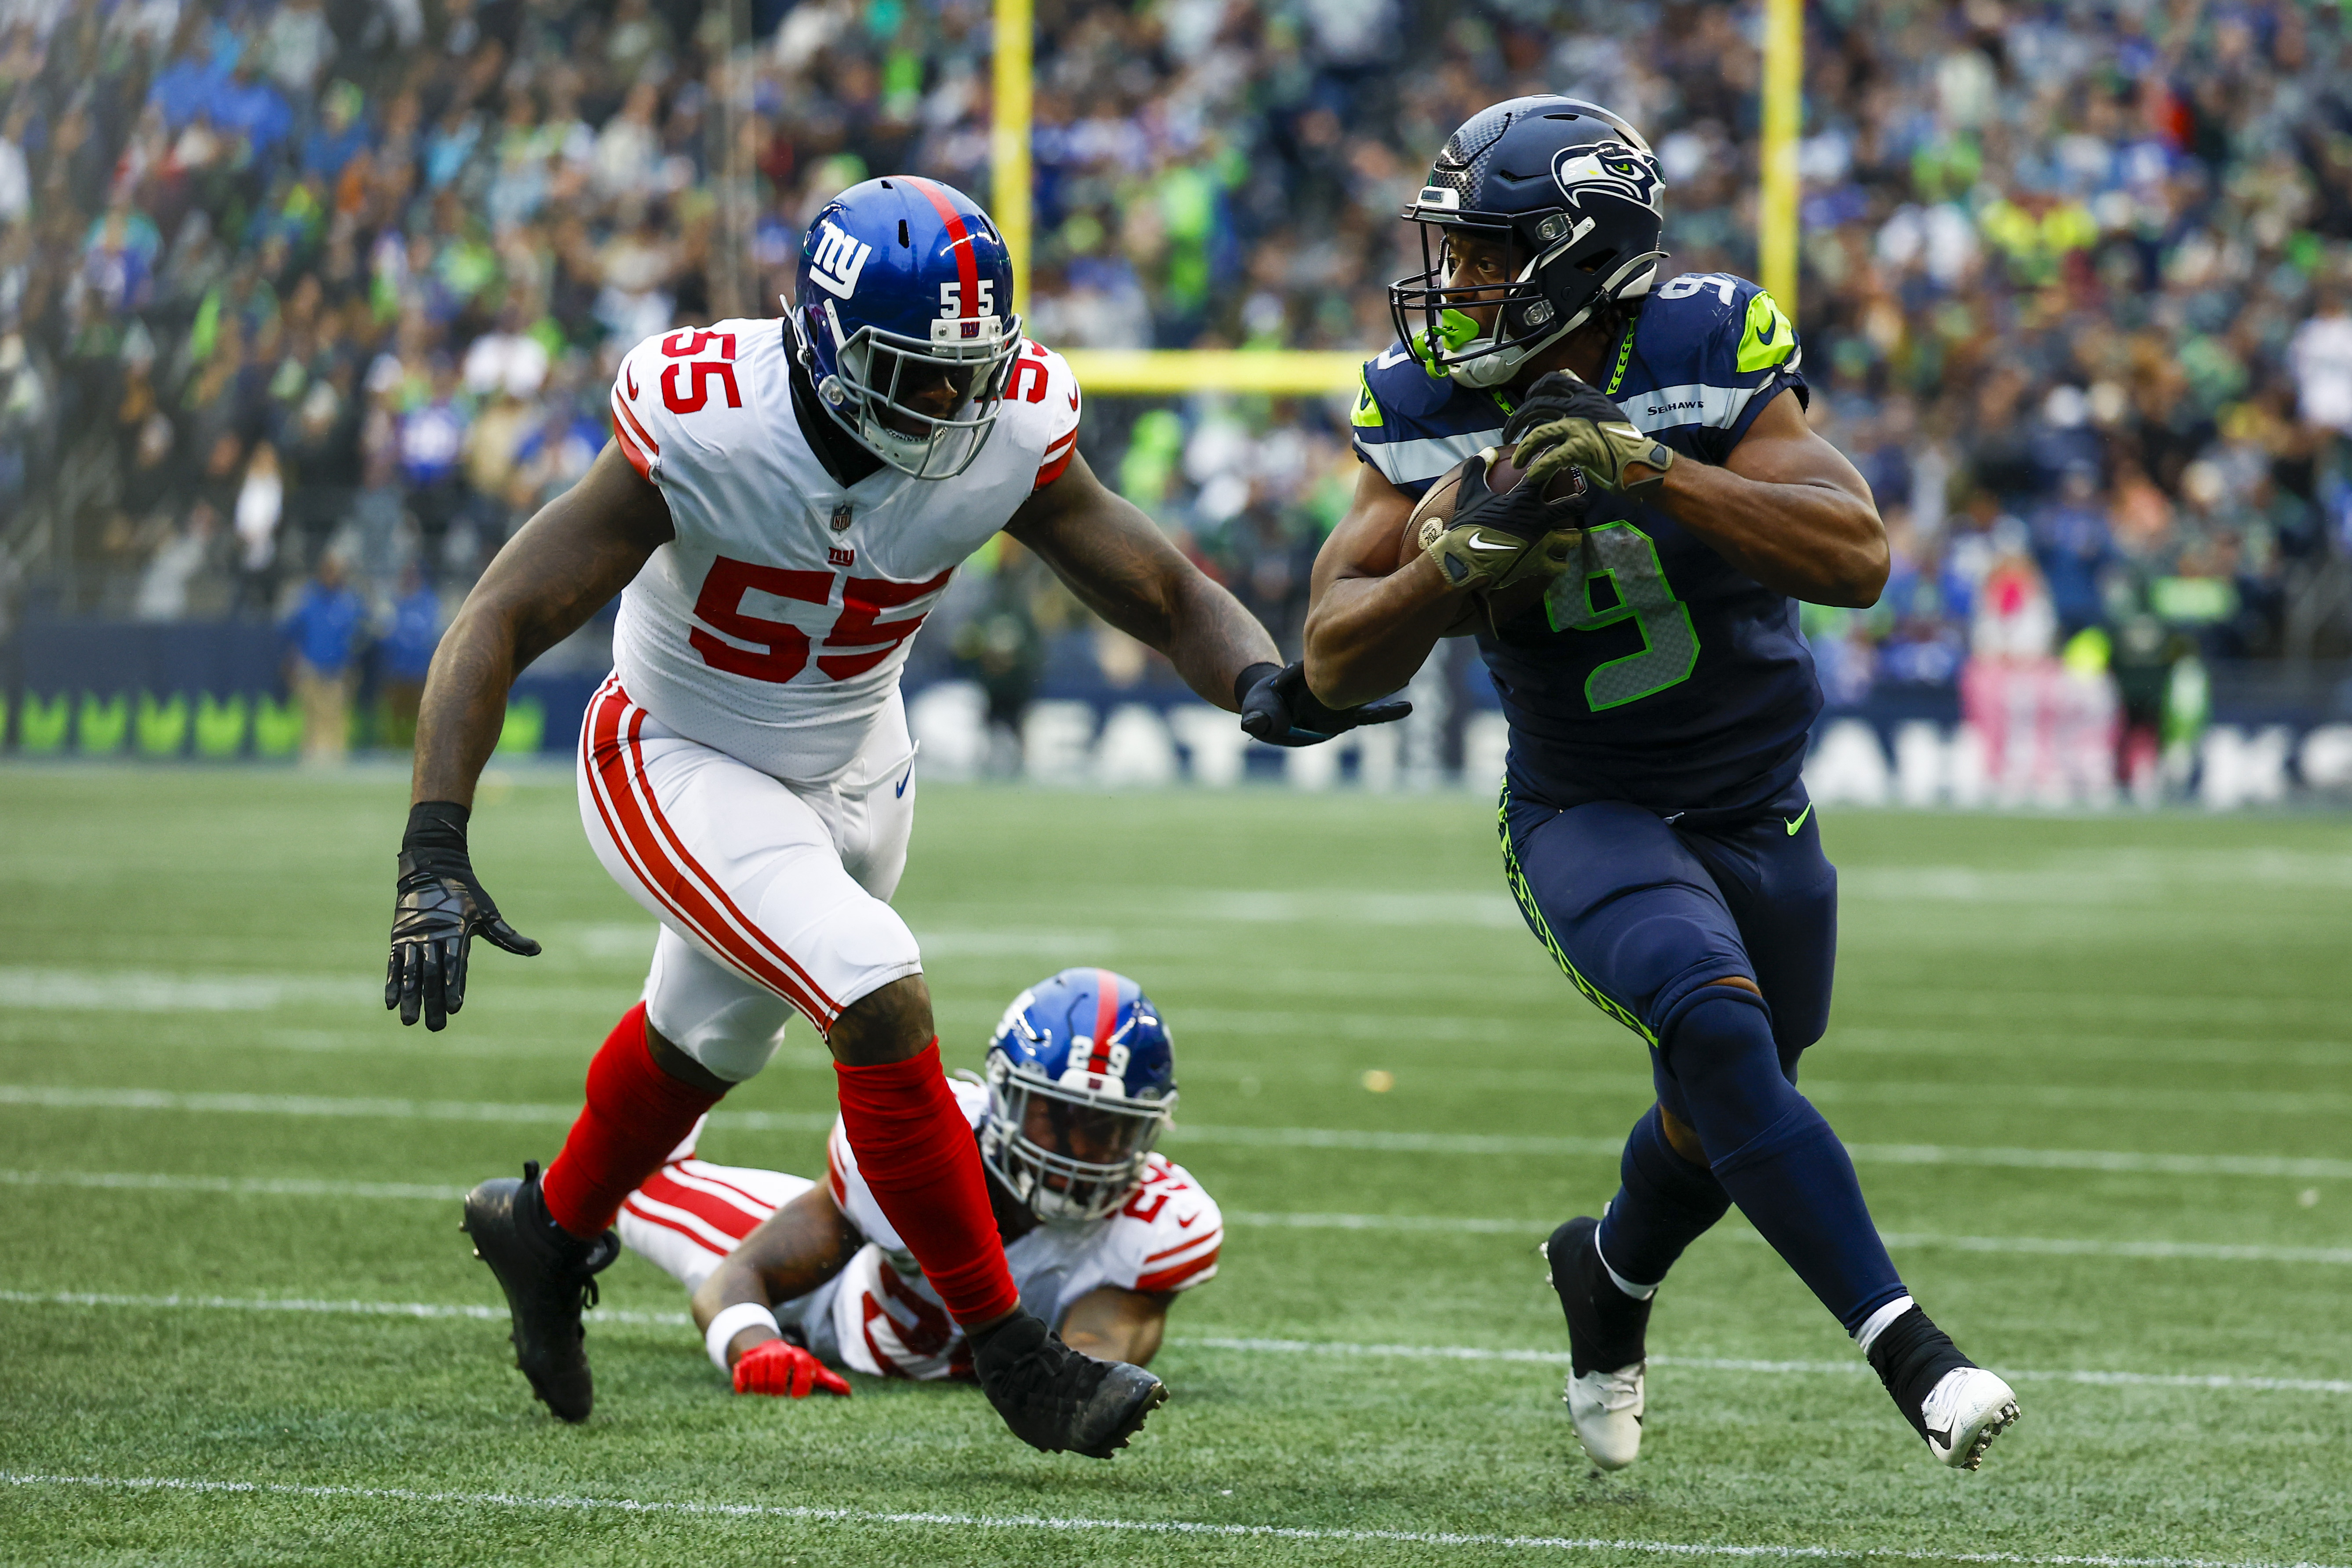 Seattle's defence dismantles the New York Giants as Seahawks win 24-3